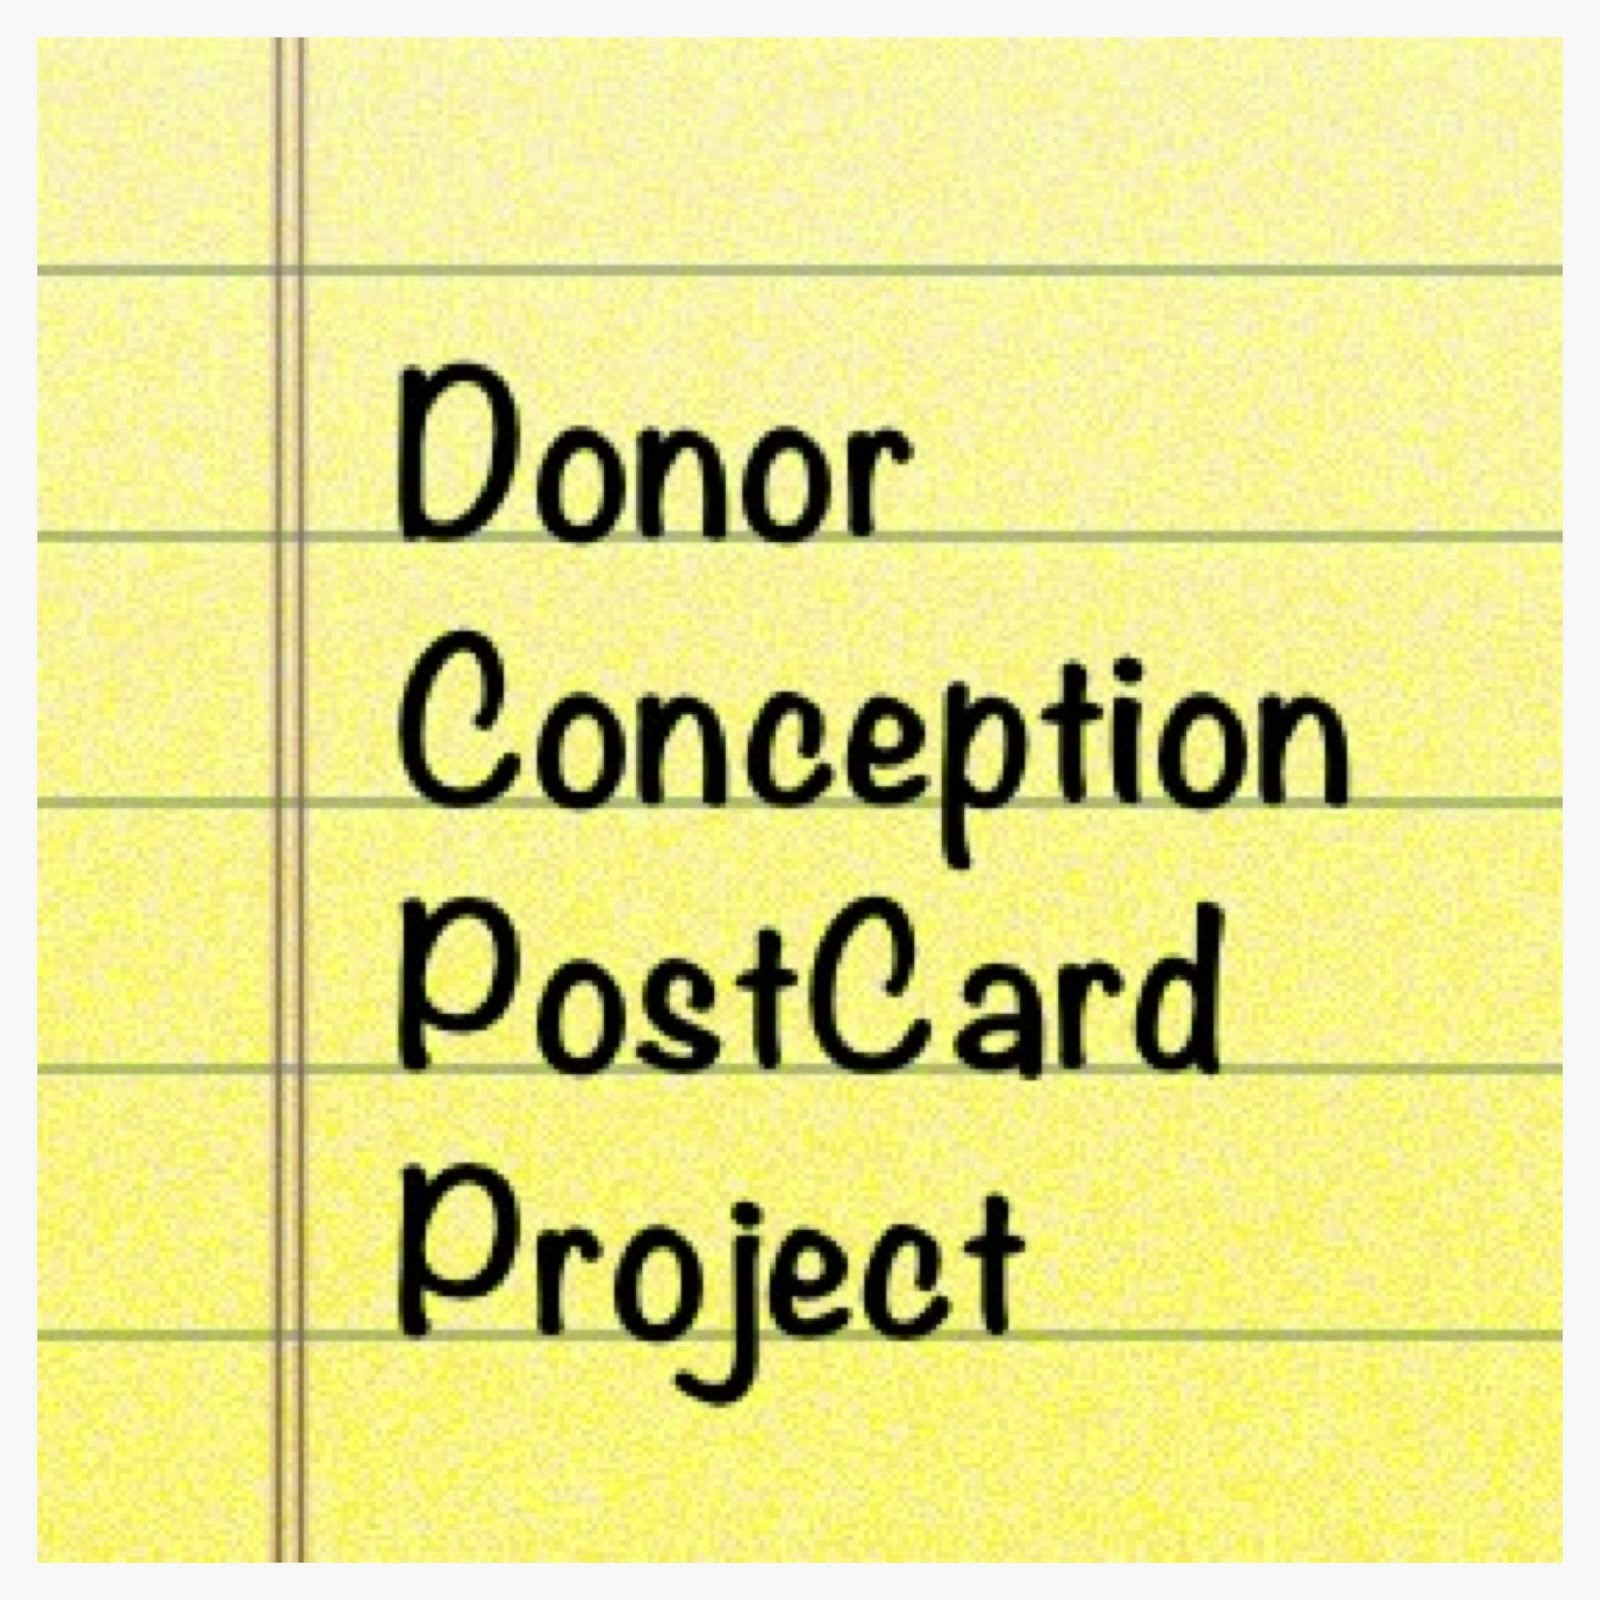 Donor Conception Postcard Project